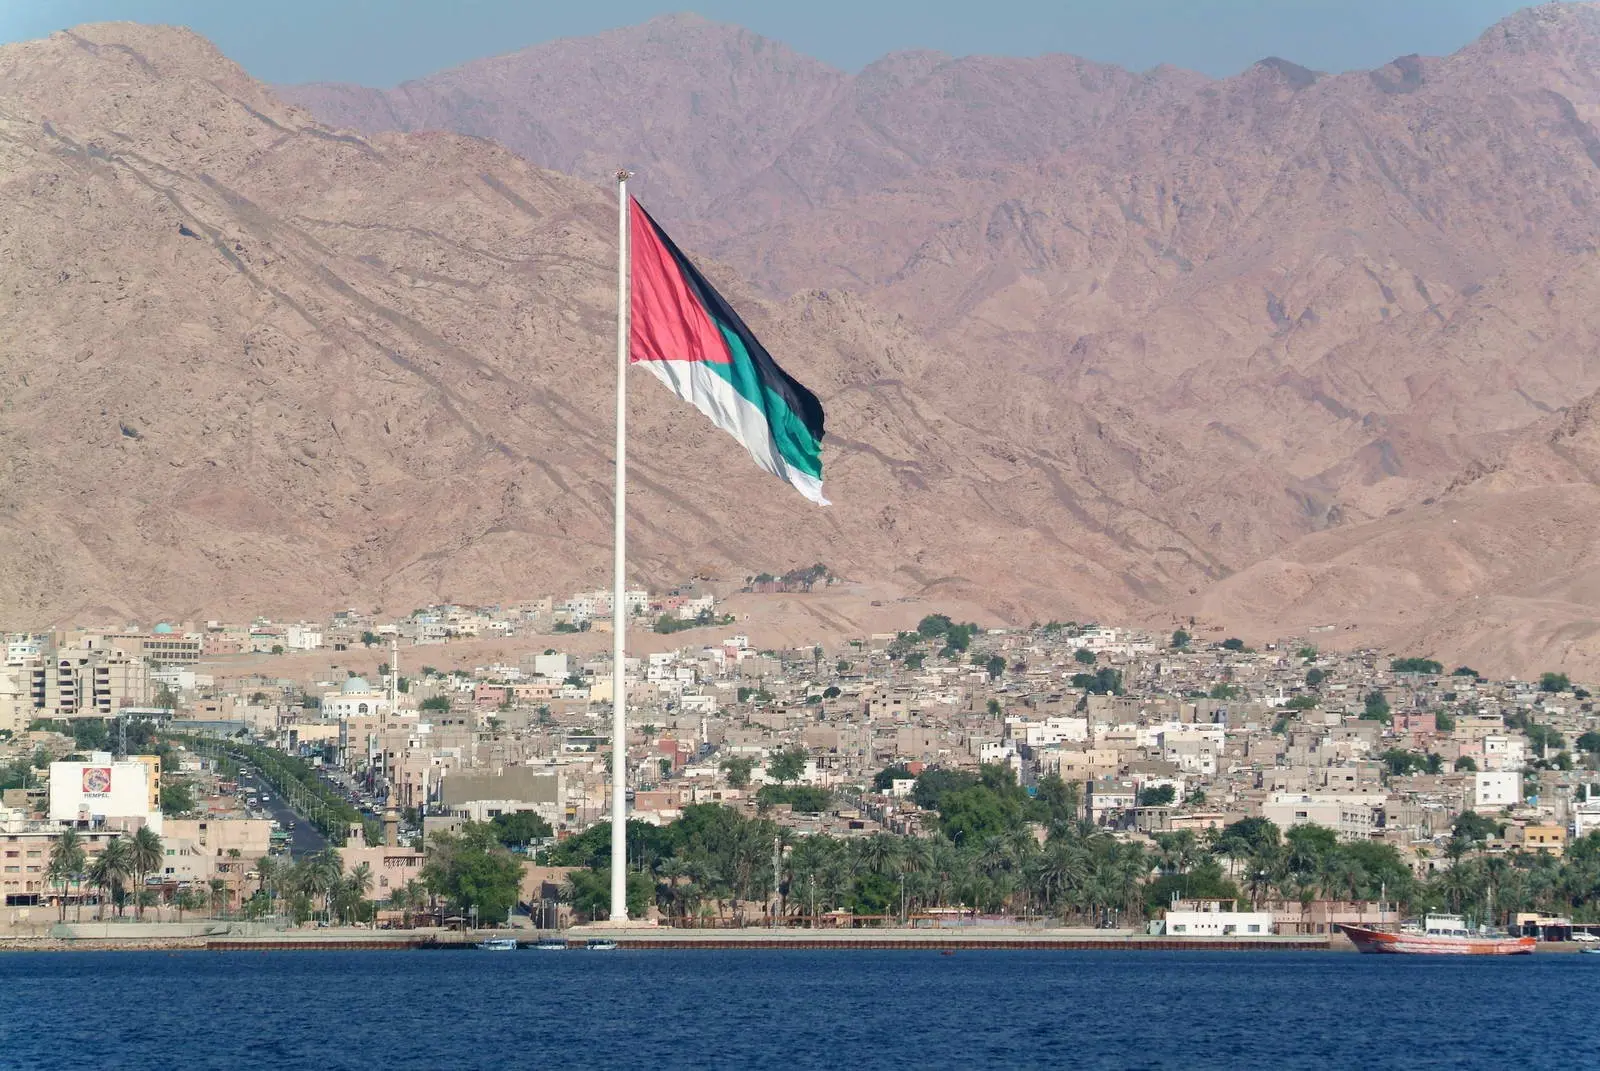 Aqaba Tourism Conference Launches to Bring Together Jordanian, International Stakeholders